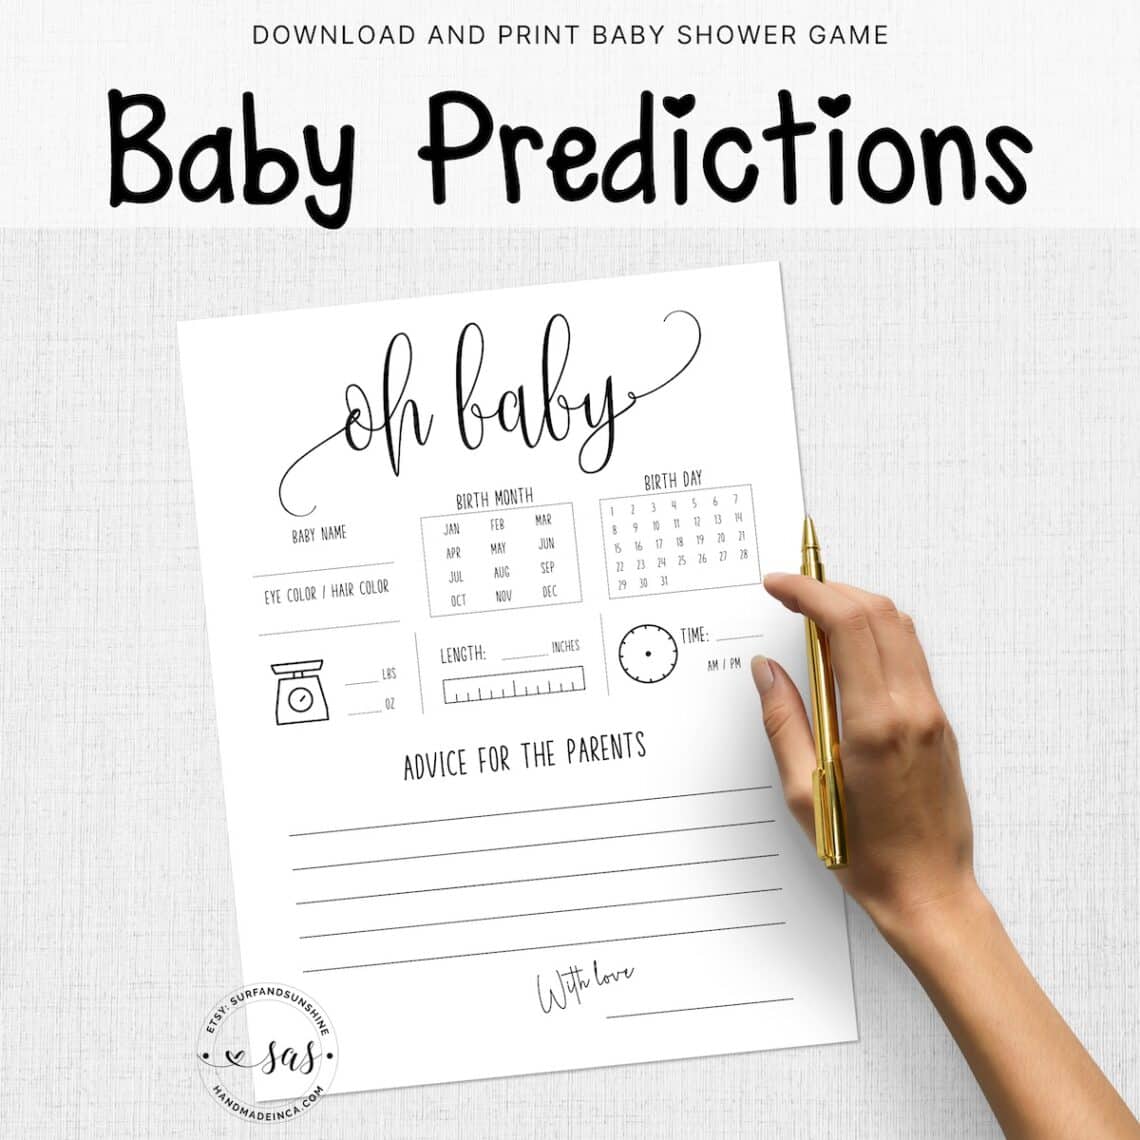 baby shower printable baby predictions and advice - Baby Shower Ideas on a Budget - Baby Shower Ideas on a Budget